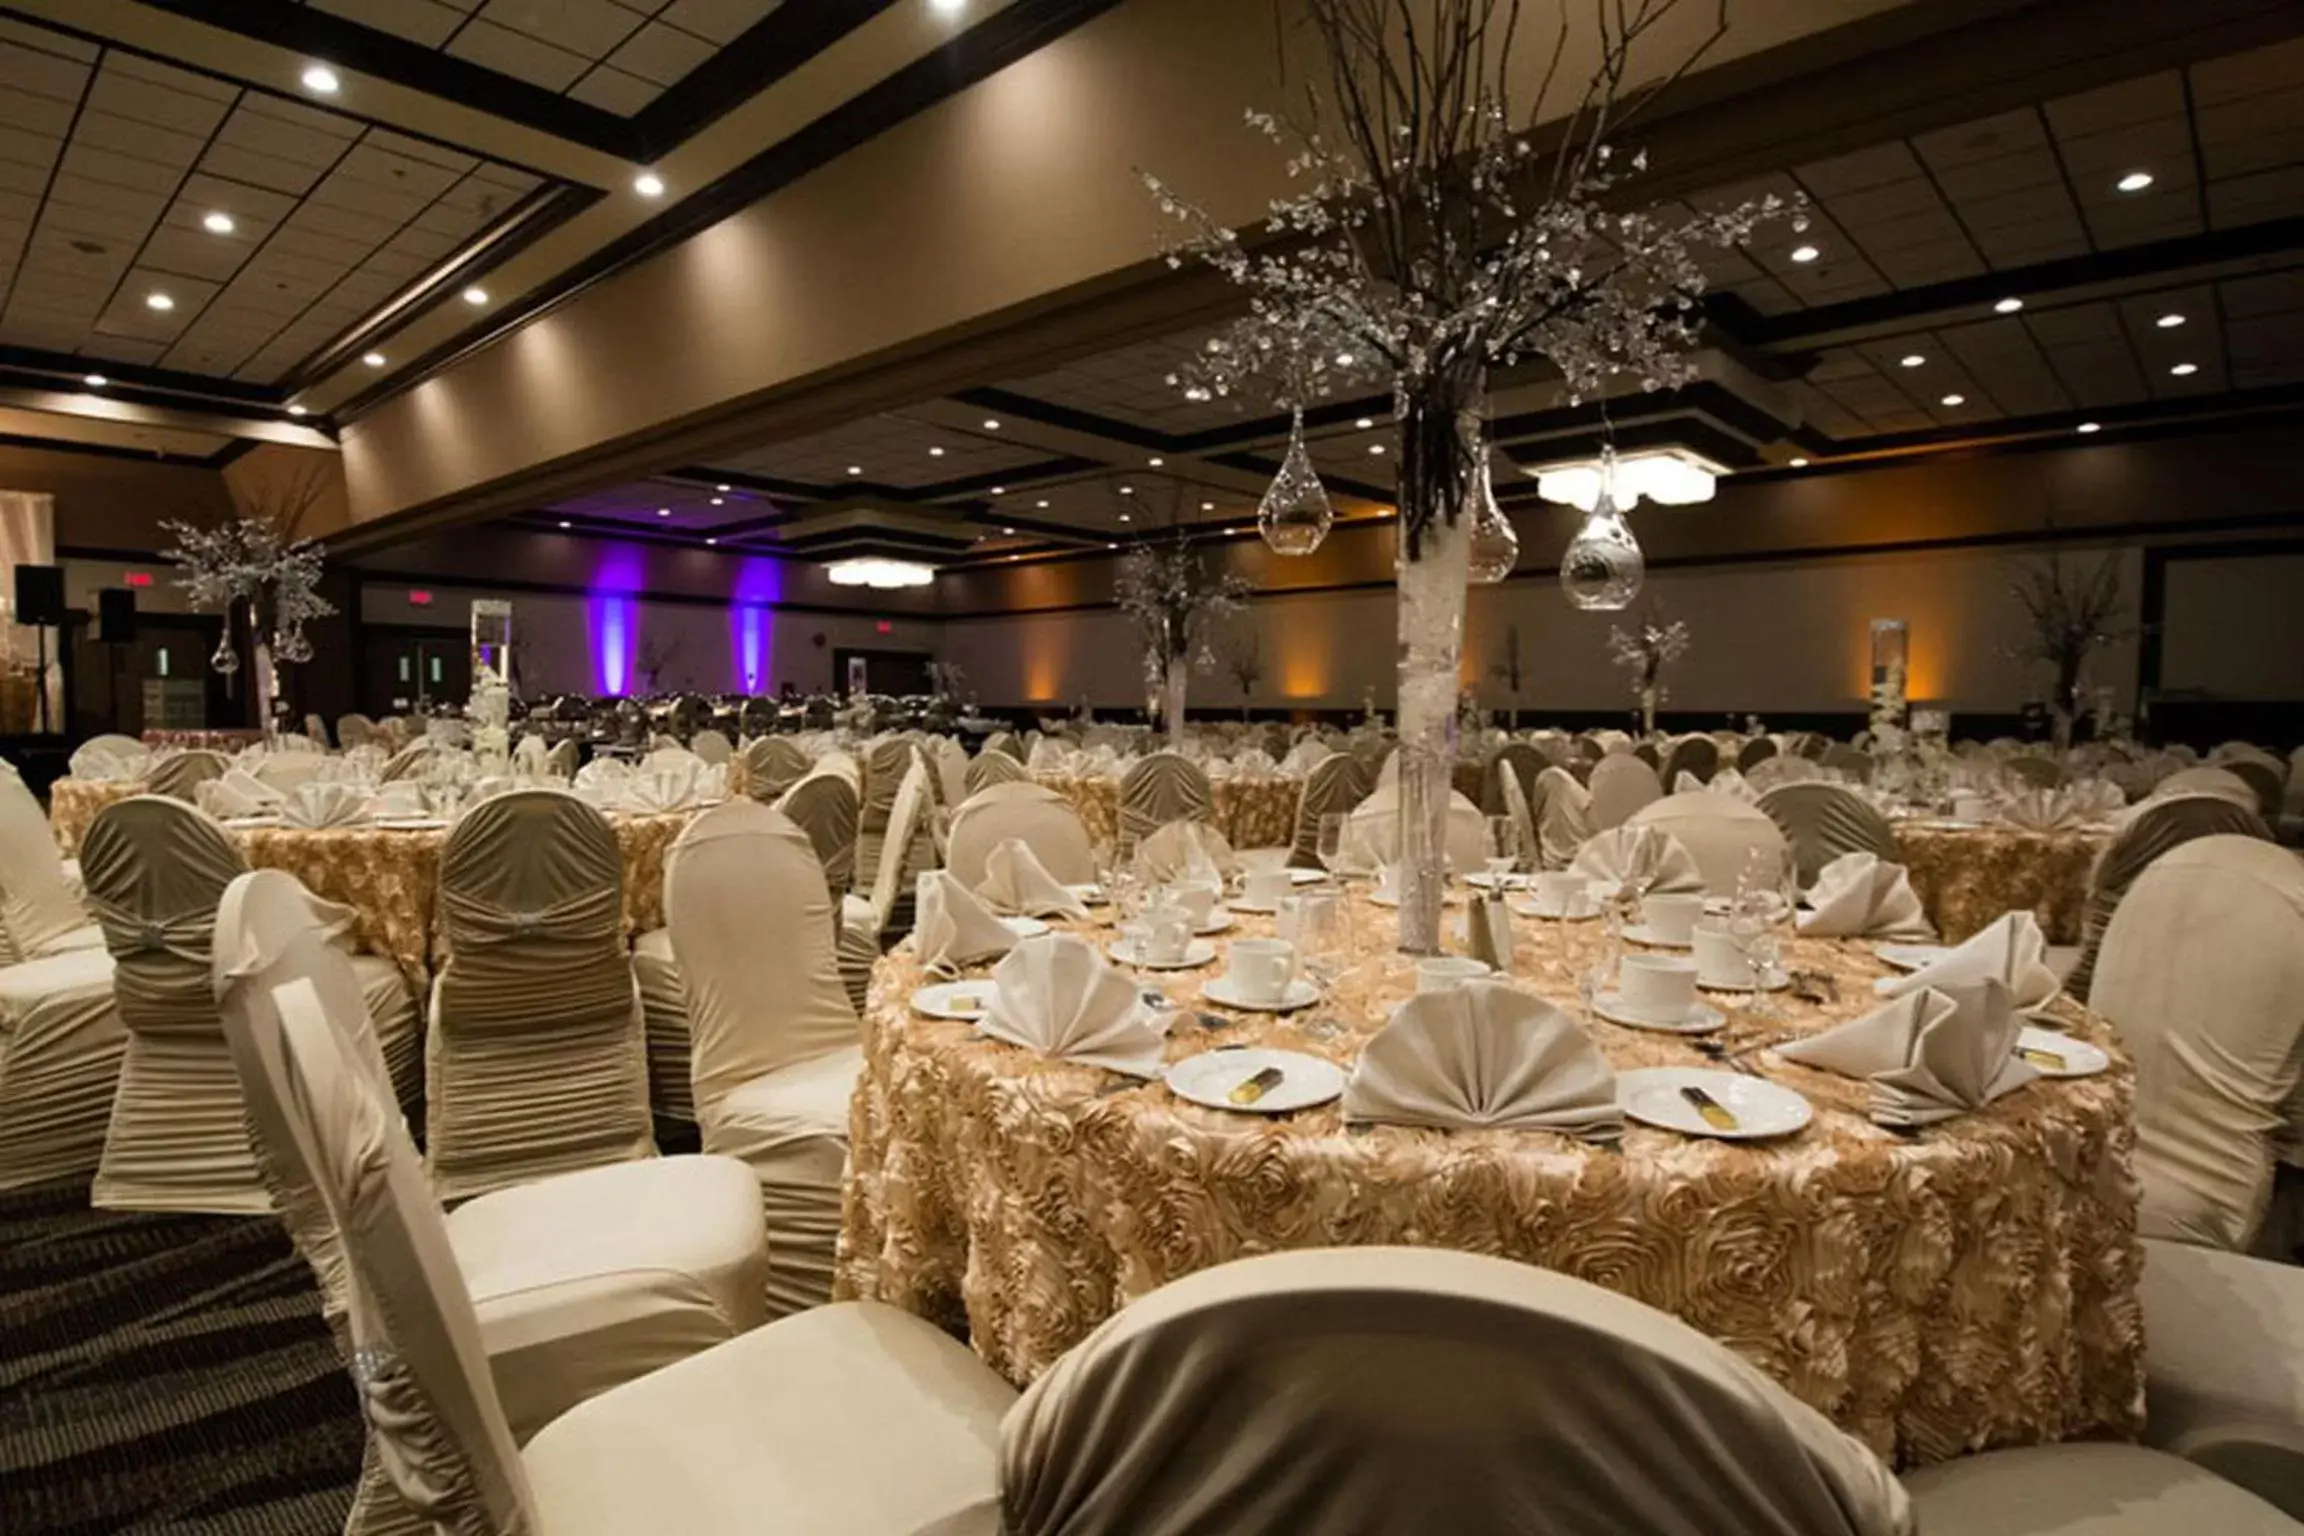 Banquet/Function facilities, Banquet Facilities in Edmonton Inn and Conference Centre